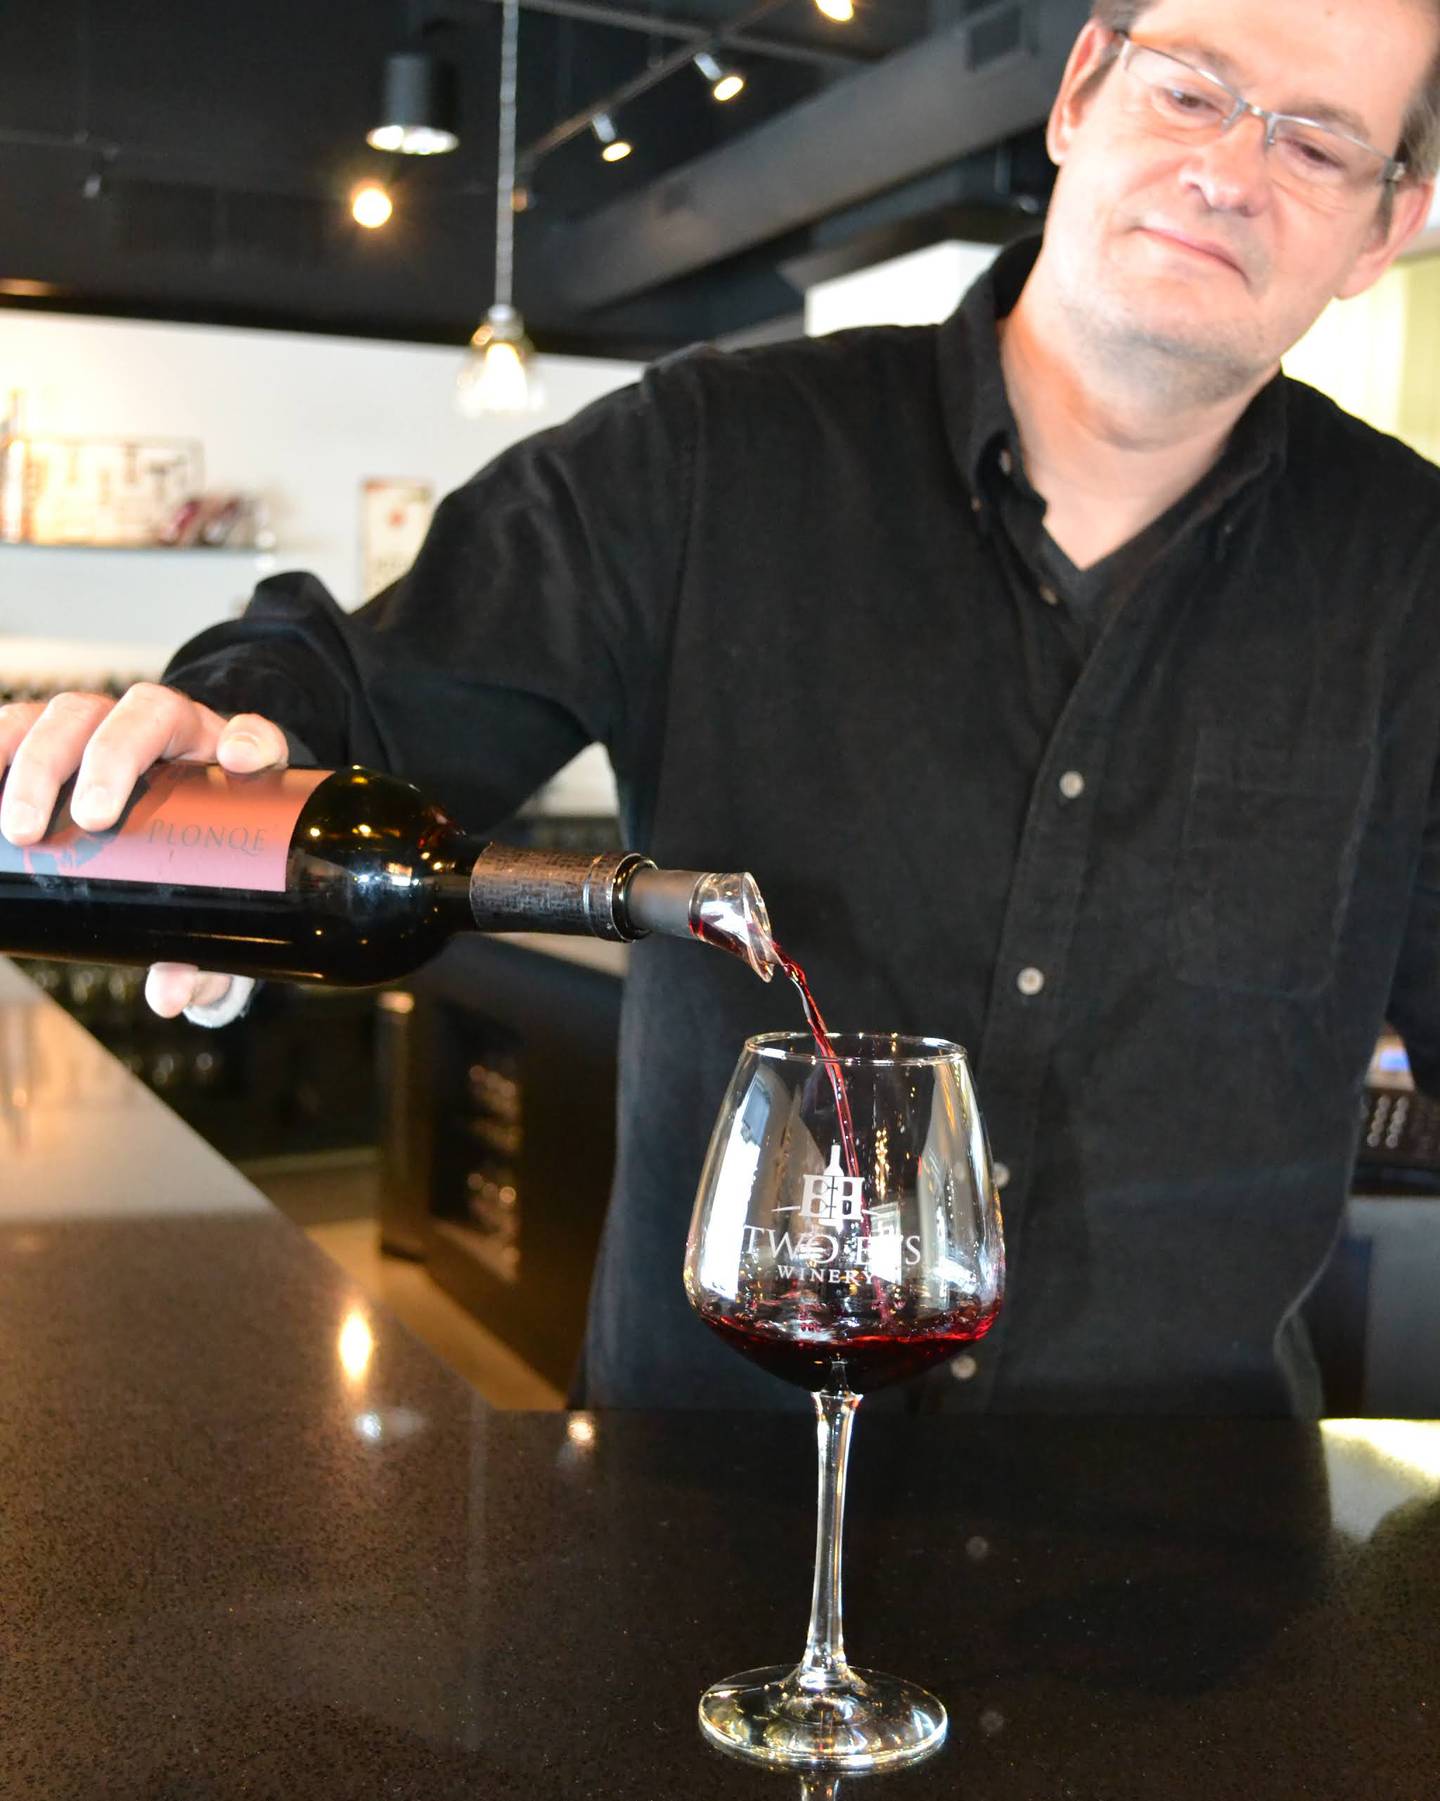 Dennis Hart pours a glass of wine at Two EE’s winery. His winemaking hobby sparked the family’s interest in opening a business. Indiana is home to more than 100 wineries. Careers in the industry include winemaking, grape growing, marketing and more.